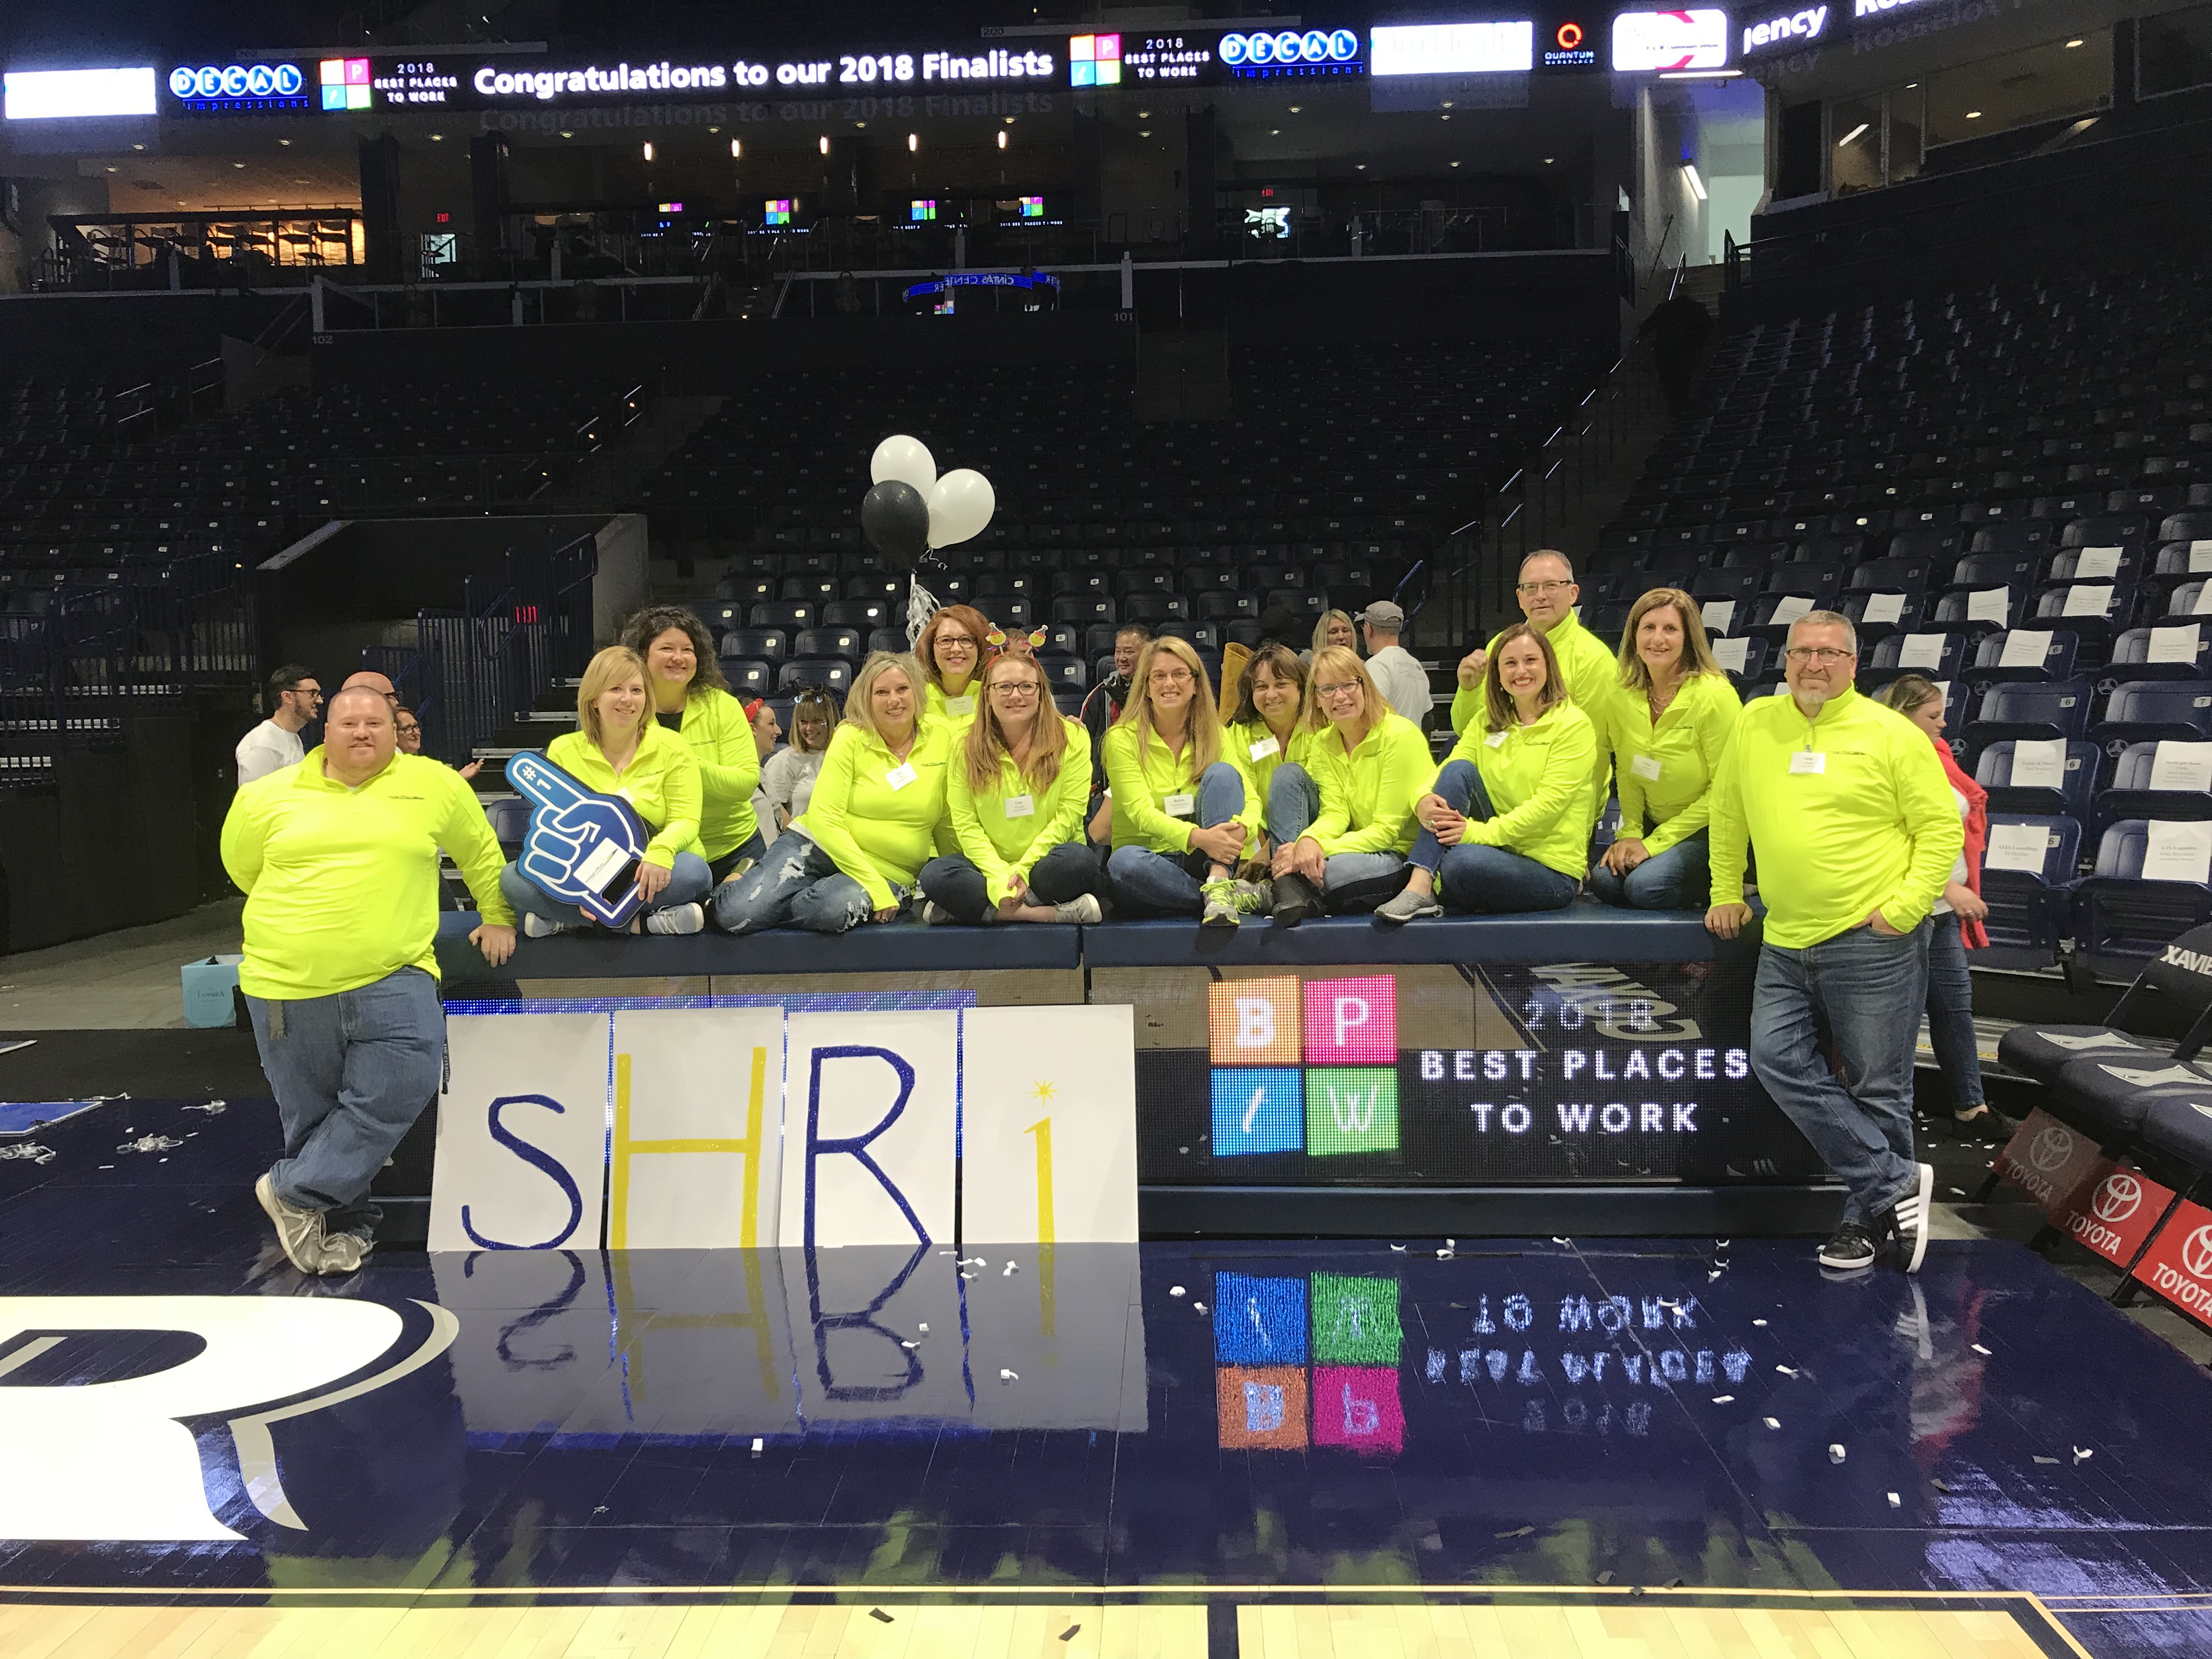 strategic HR inc team photo on the court at the Best Places to Work 2018 celebration